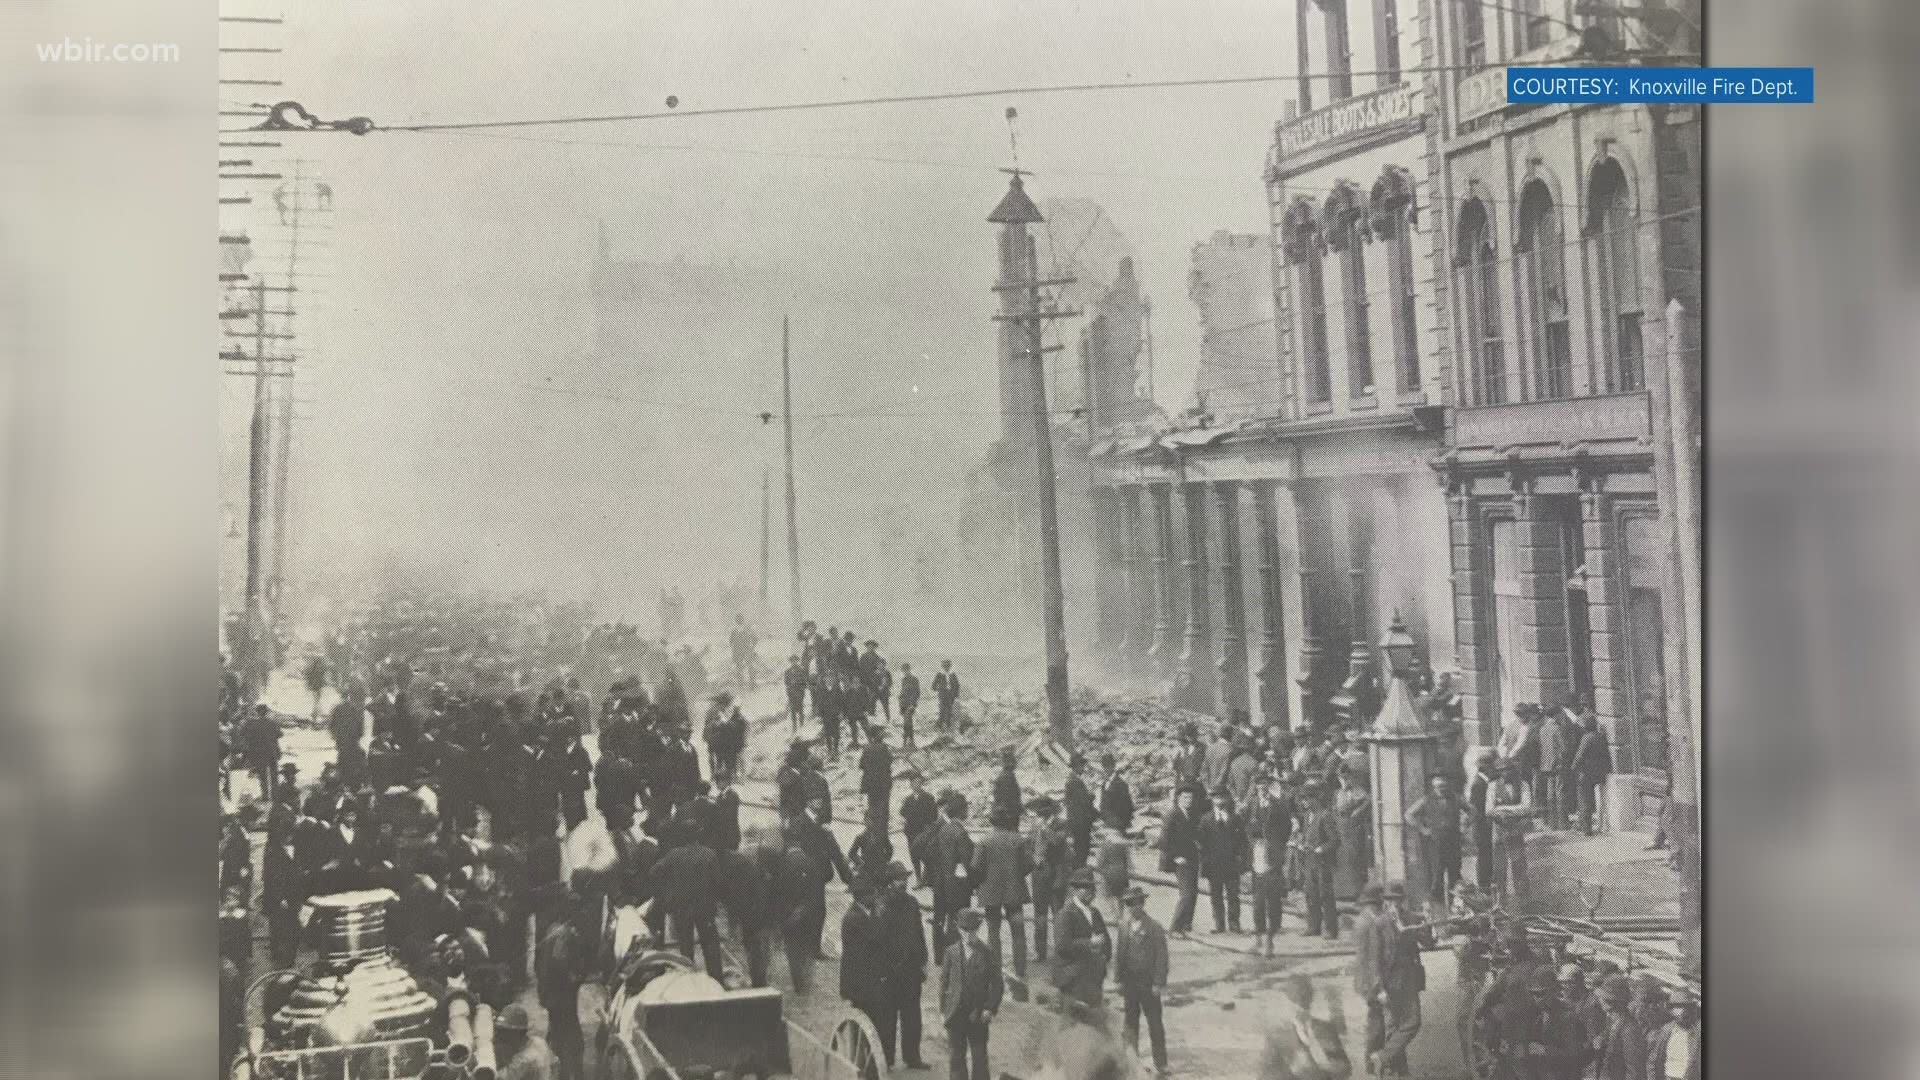 Thursday marks 124 years since the biggest and most damaging fire in Knoxville history.